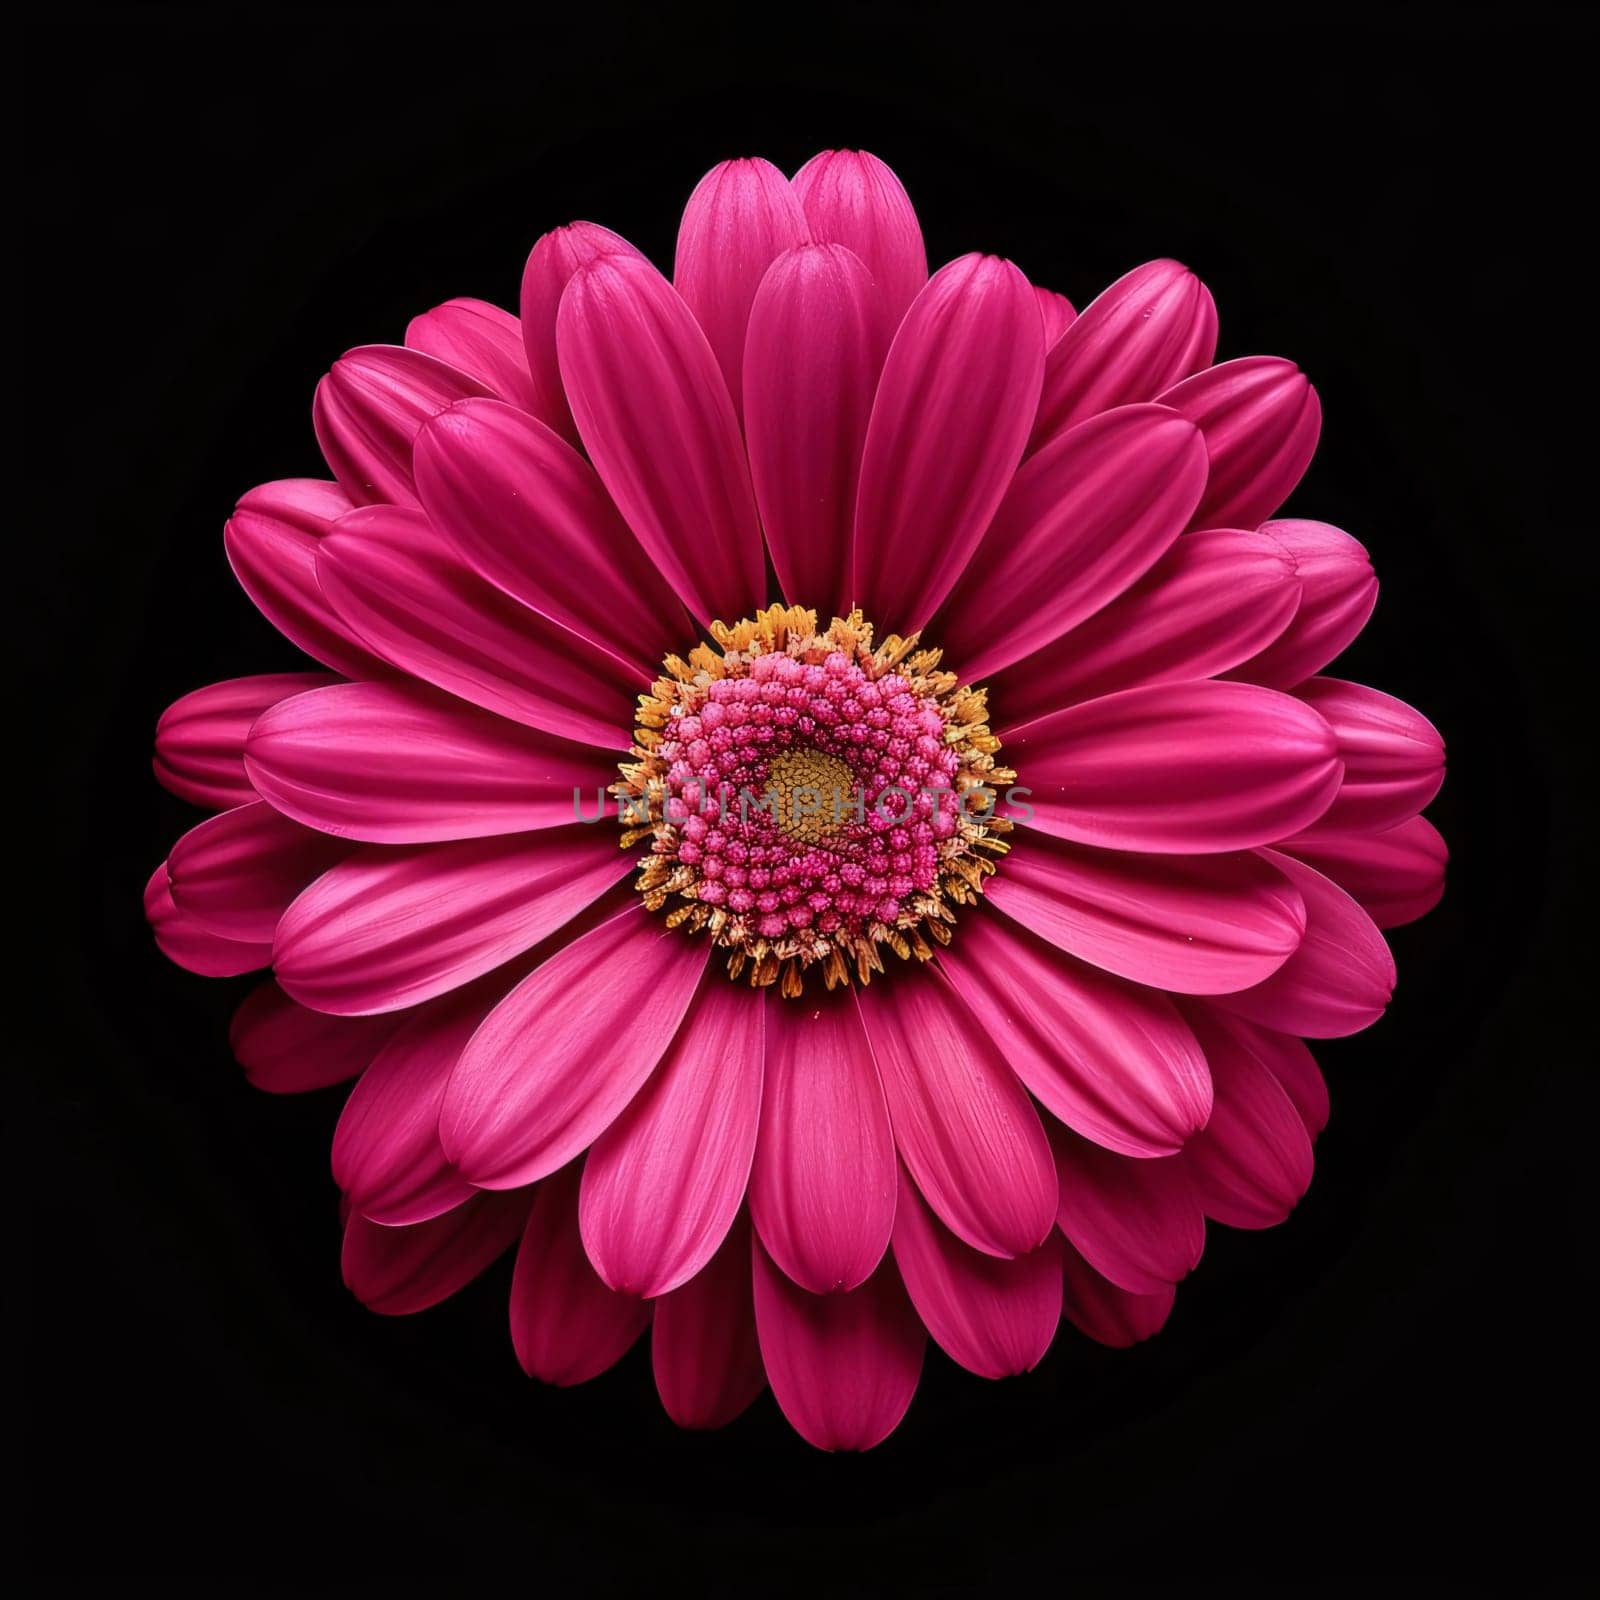 Pink gerber daisyon black background. Flowering flowers, a symbol of spring, new life. by ThemesS